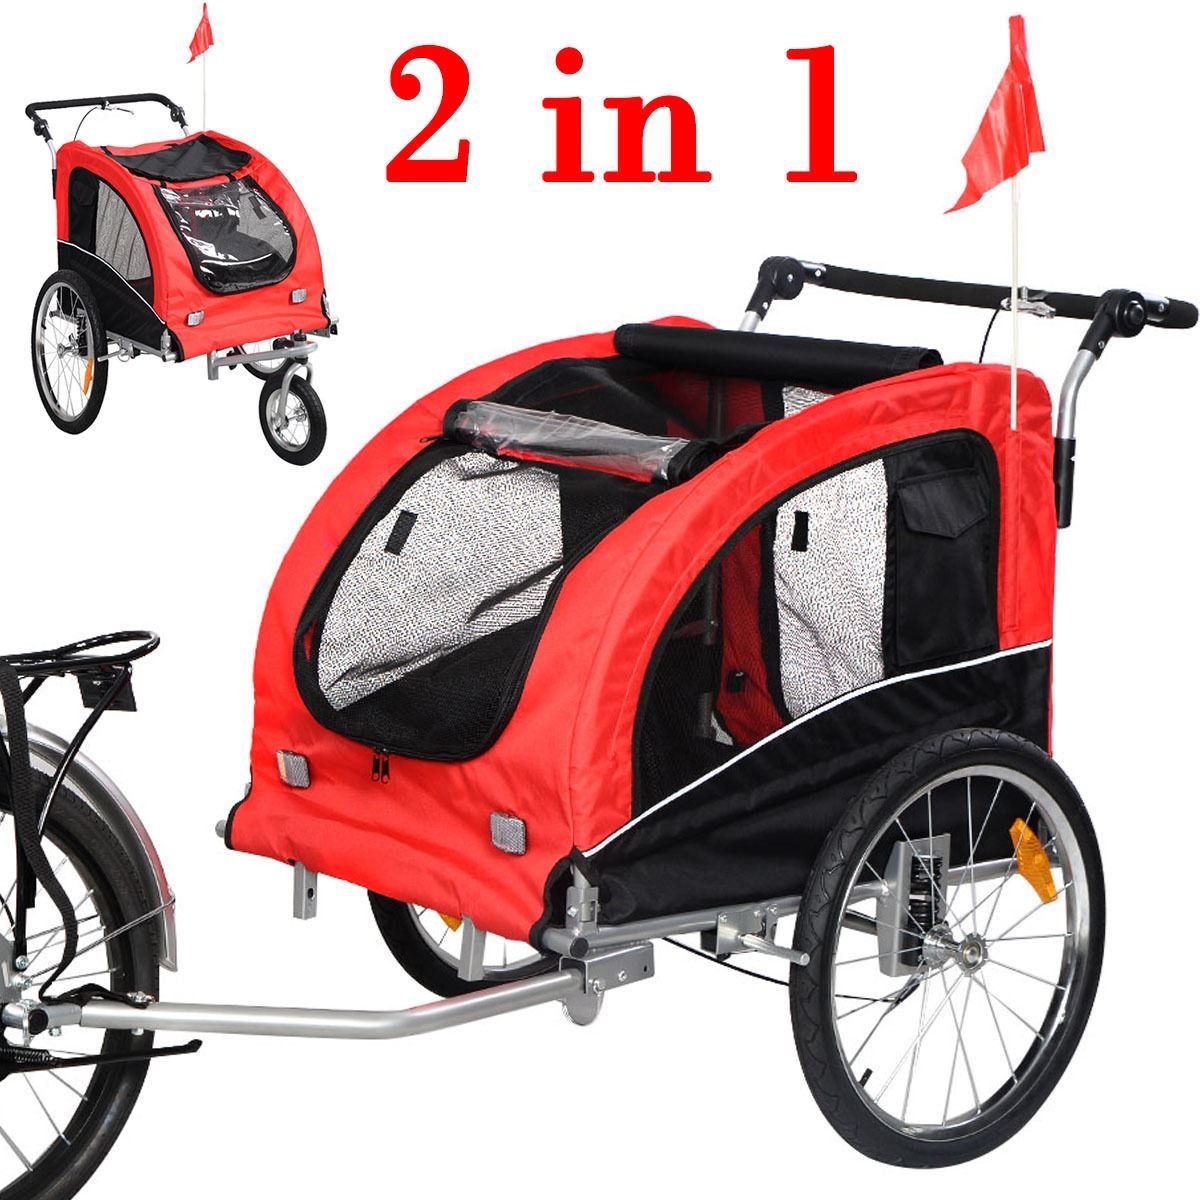 Picture of Online Gym Shop CB17023 Pet Bike Trailer Bicycle Stroller Jogging with Suspension